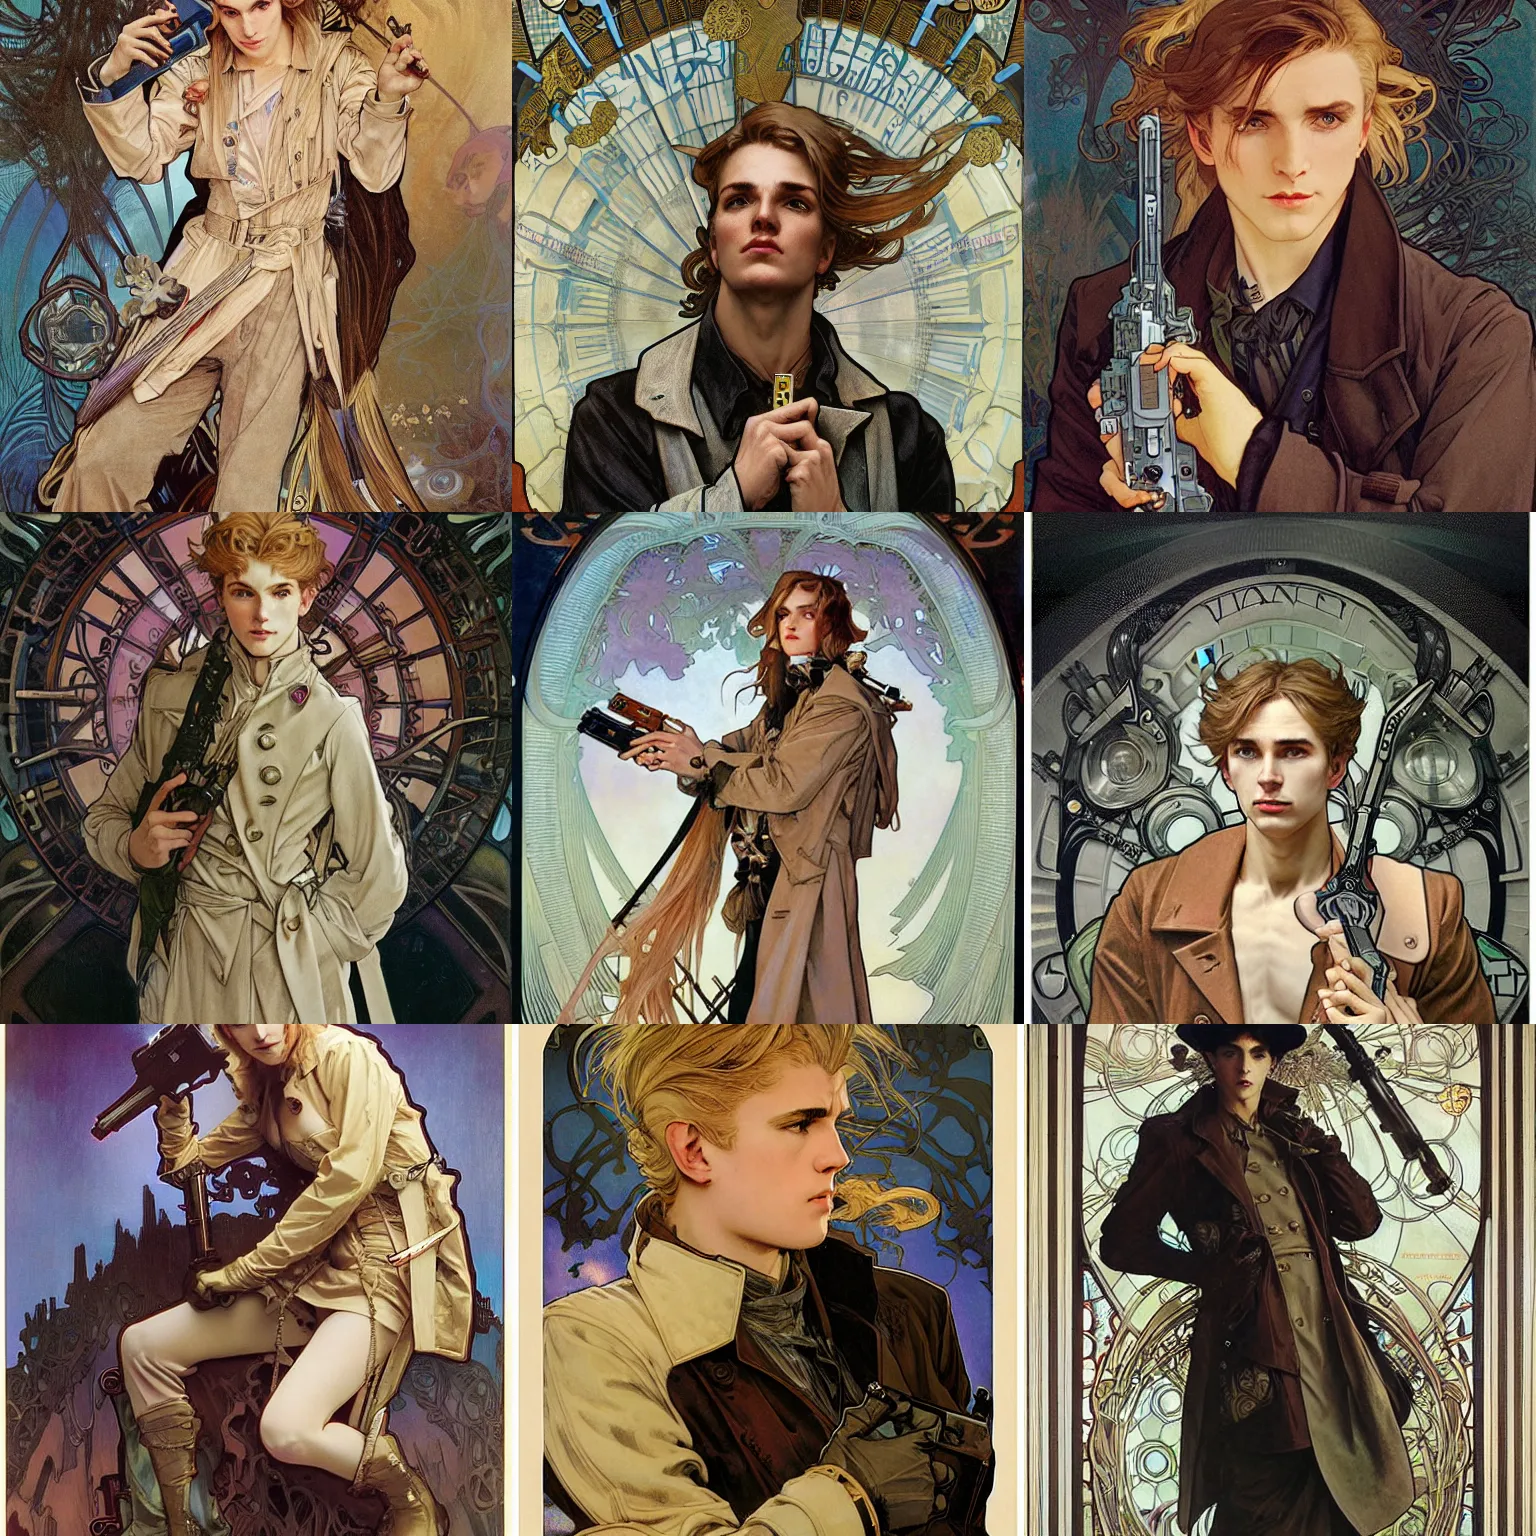 Prompt: young male wastelander wearing trench coat with blonde ponytail, holding NES Zapper, by Alphonse Mucha, Ayami Kojima, Amano, Charlie Bowater, Karol Bak, Greg Hildebrandt, Jean Delville, and Mark Brooks, Art Nouveau, Pre-Raphaelite, Neo-Gothic, gothic, Art Nouveau, rich deep moody colors